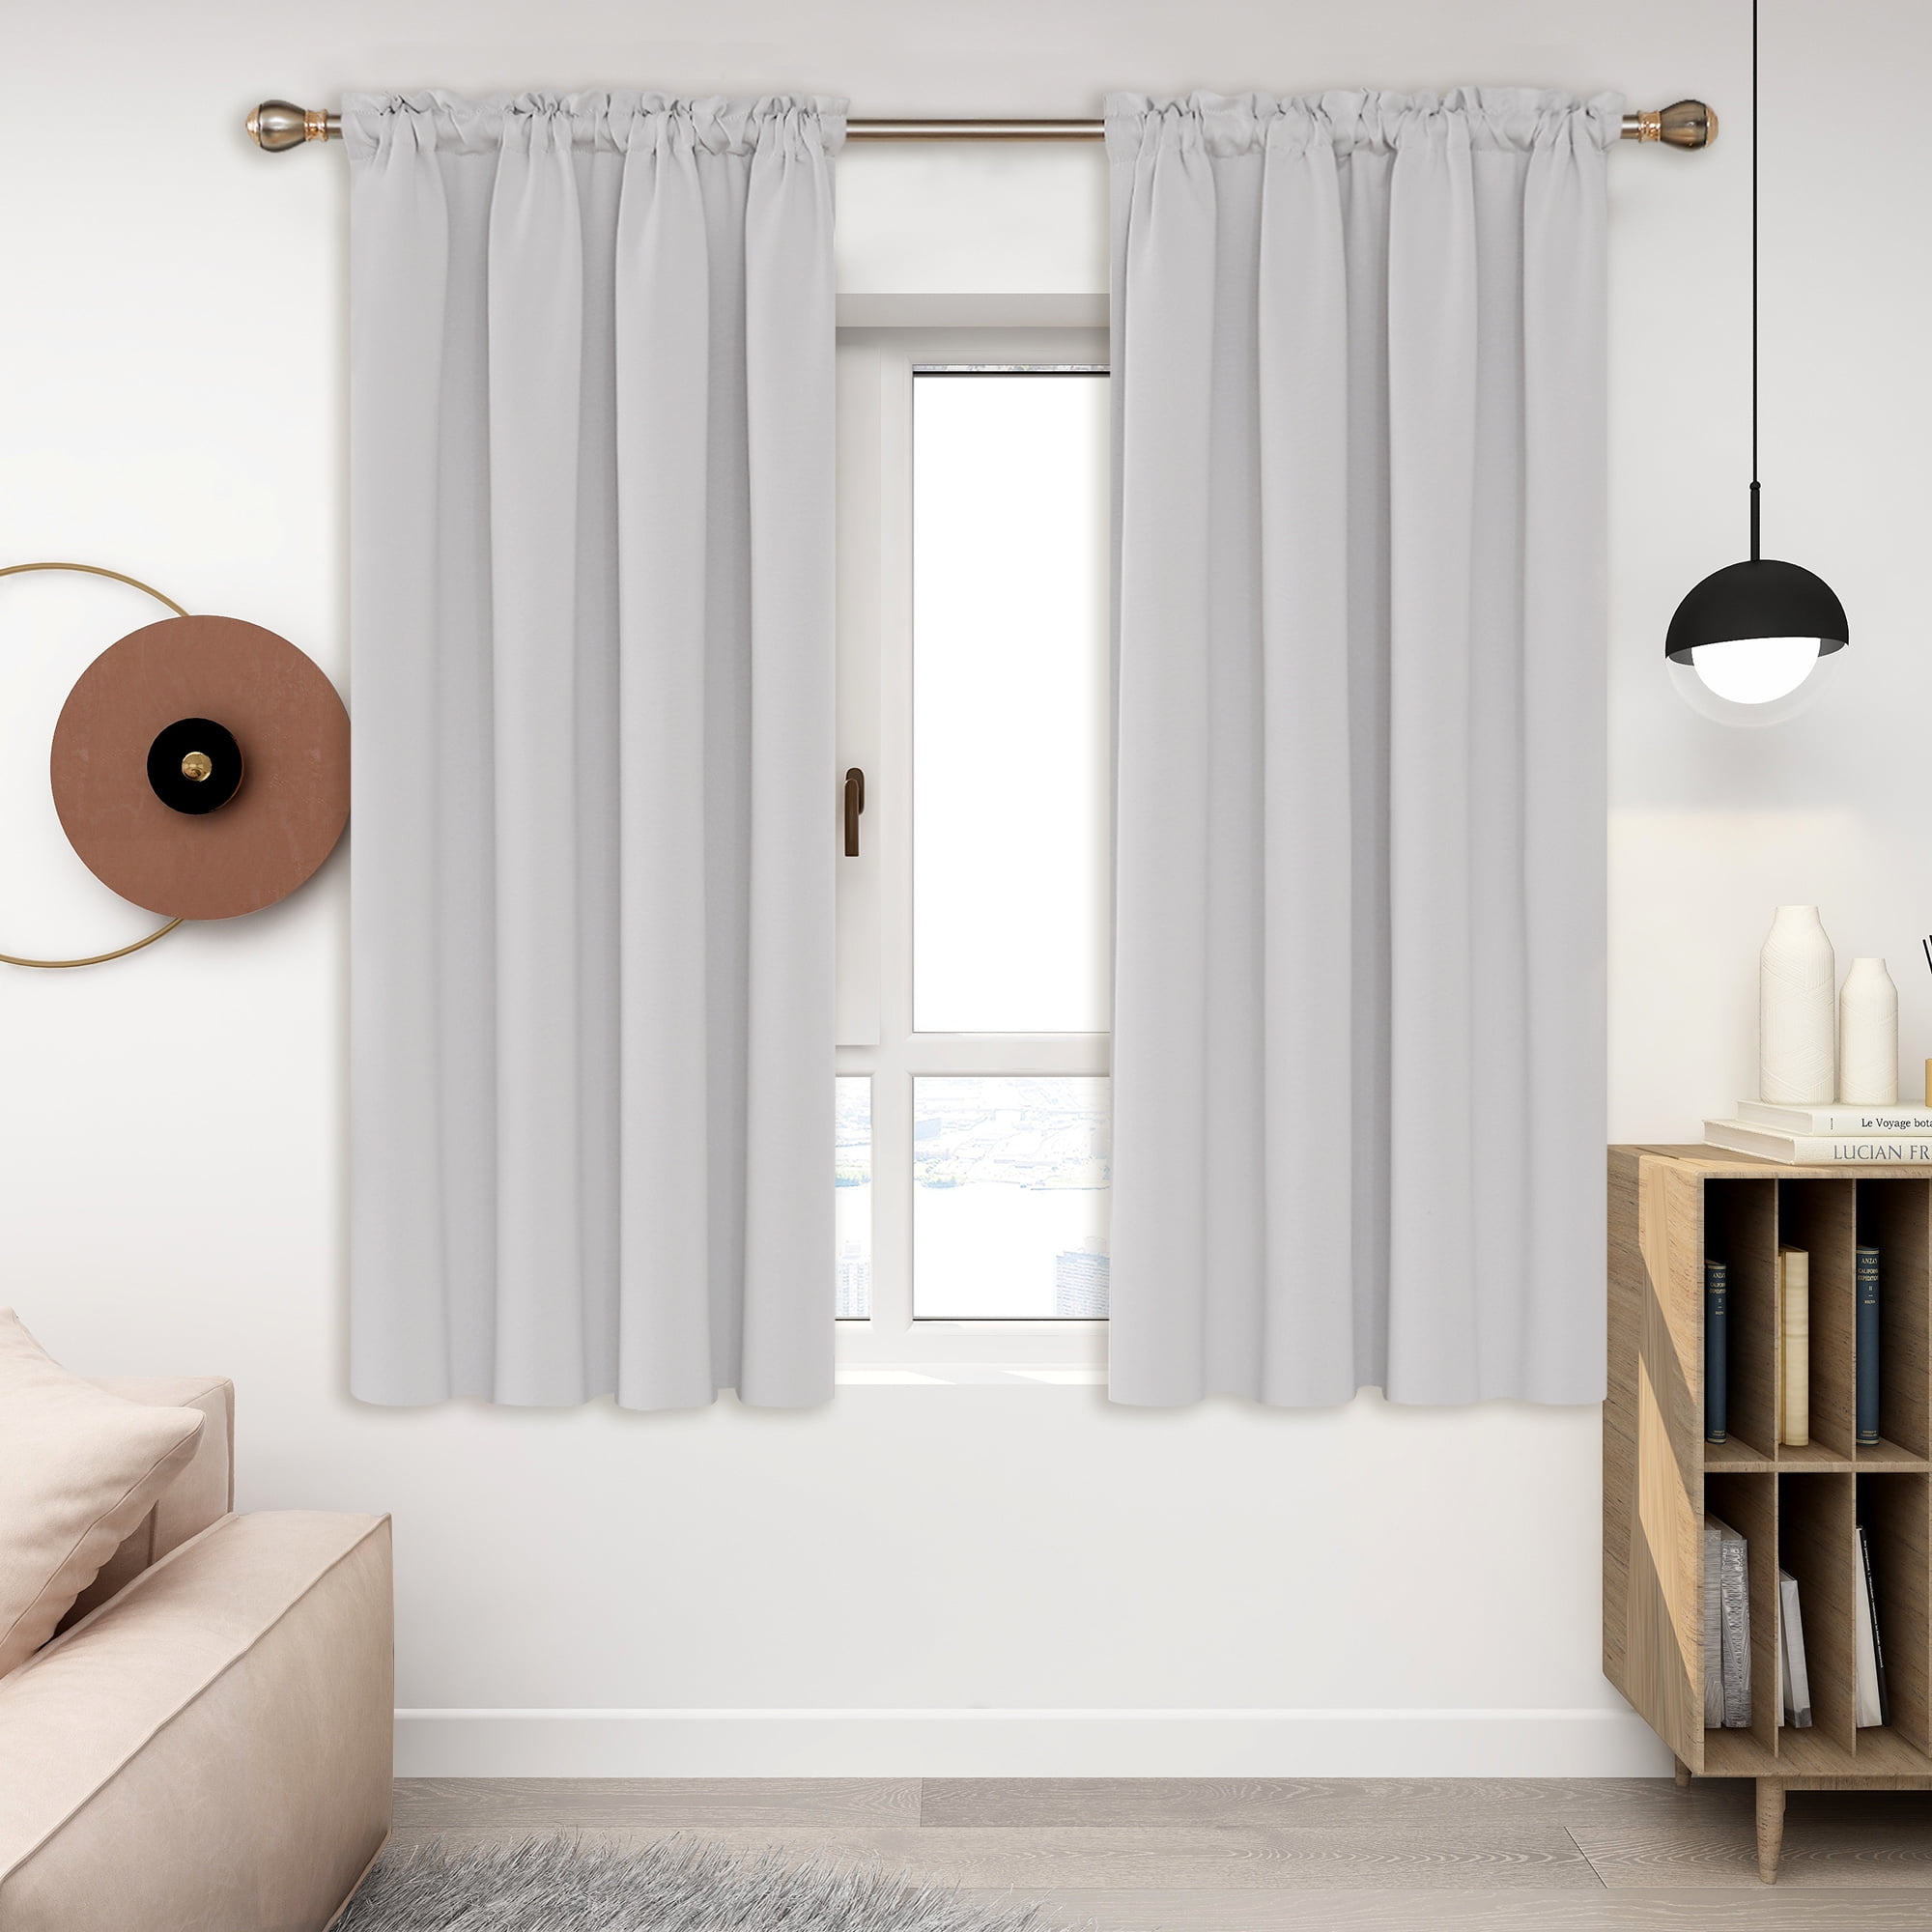 Details about   Window Panels Bedroom Living Room Divider Drapes 2 Layers W52 X L63 63 in Linen. 